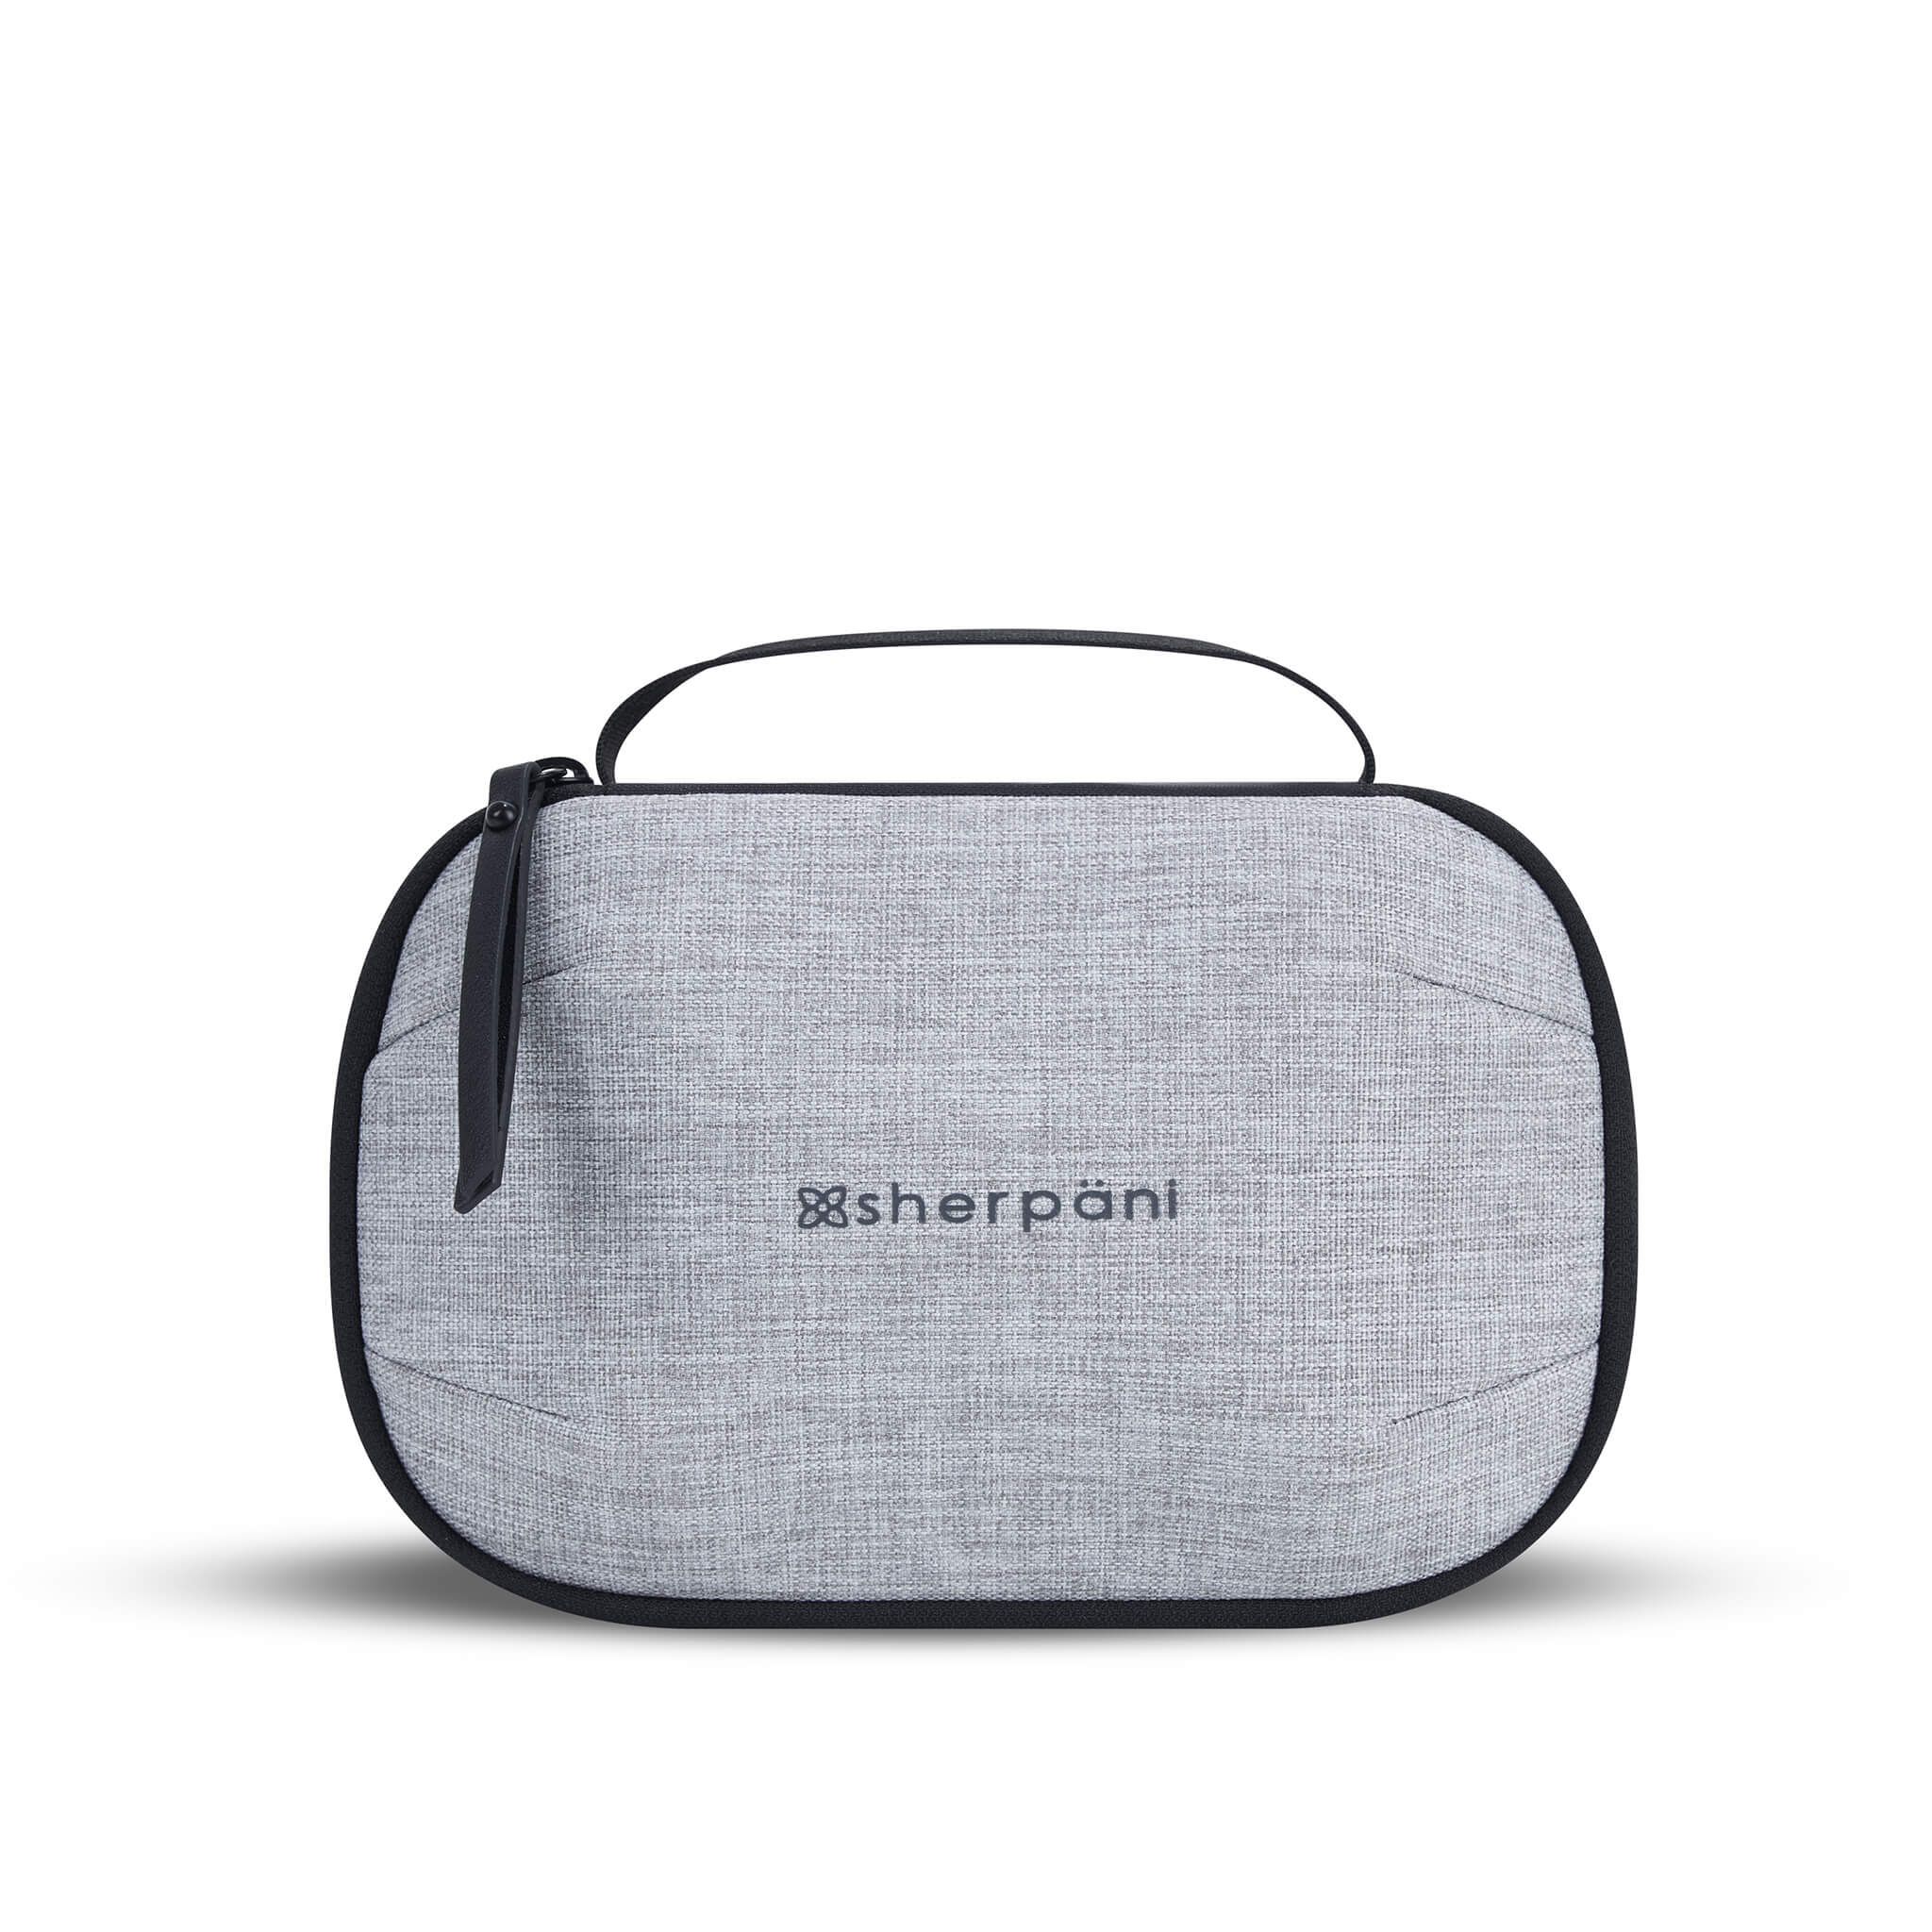 Flat front view of Sherpani travel accessory the Atlas in Sterling. The Atlas doubles as a toiletry bag and a tech pouch.